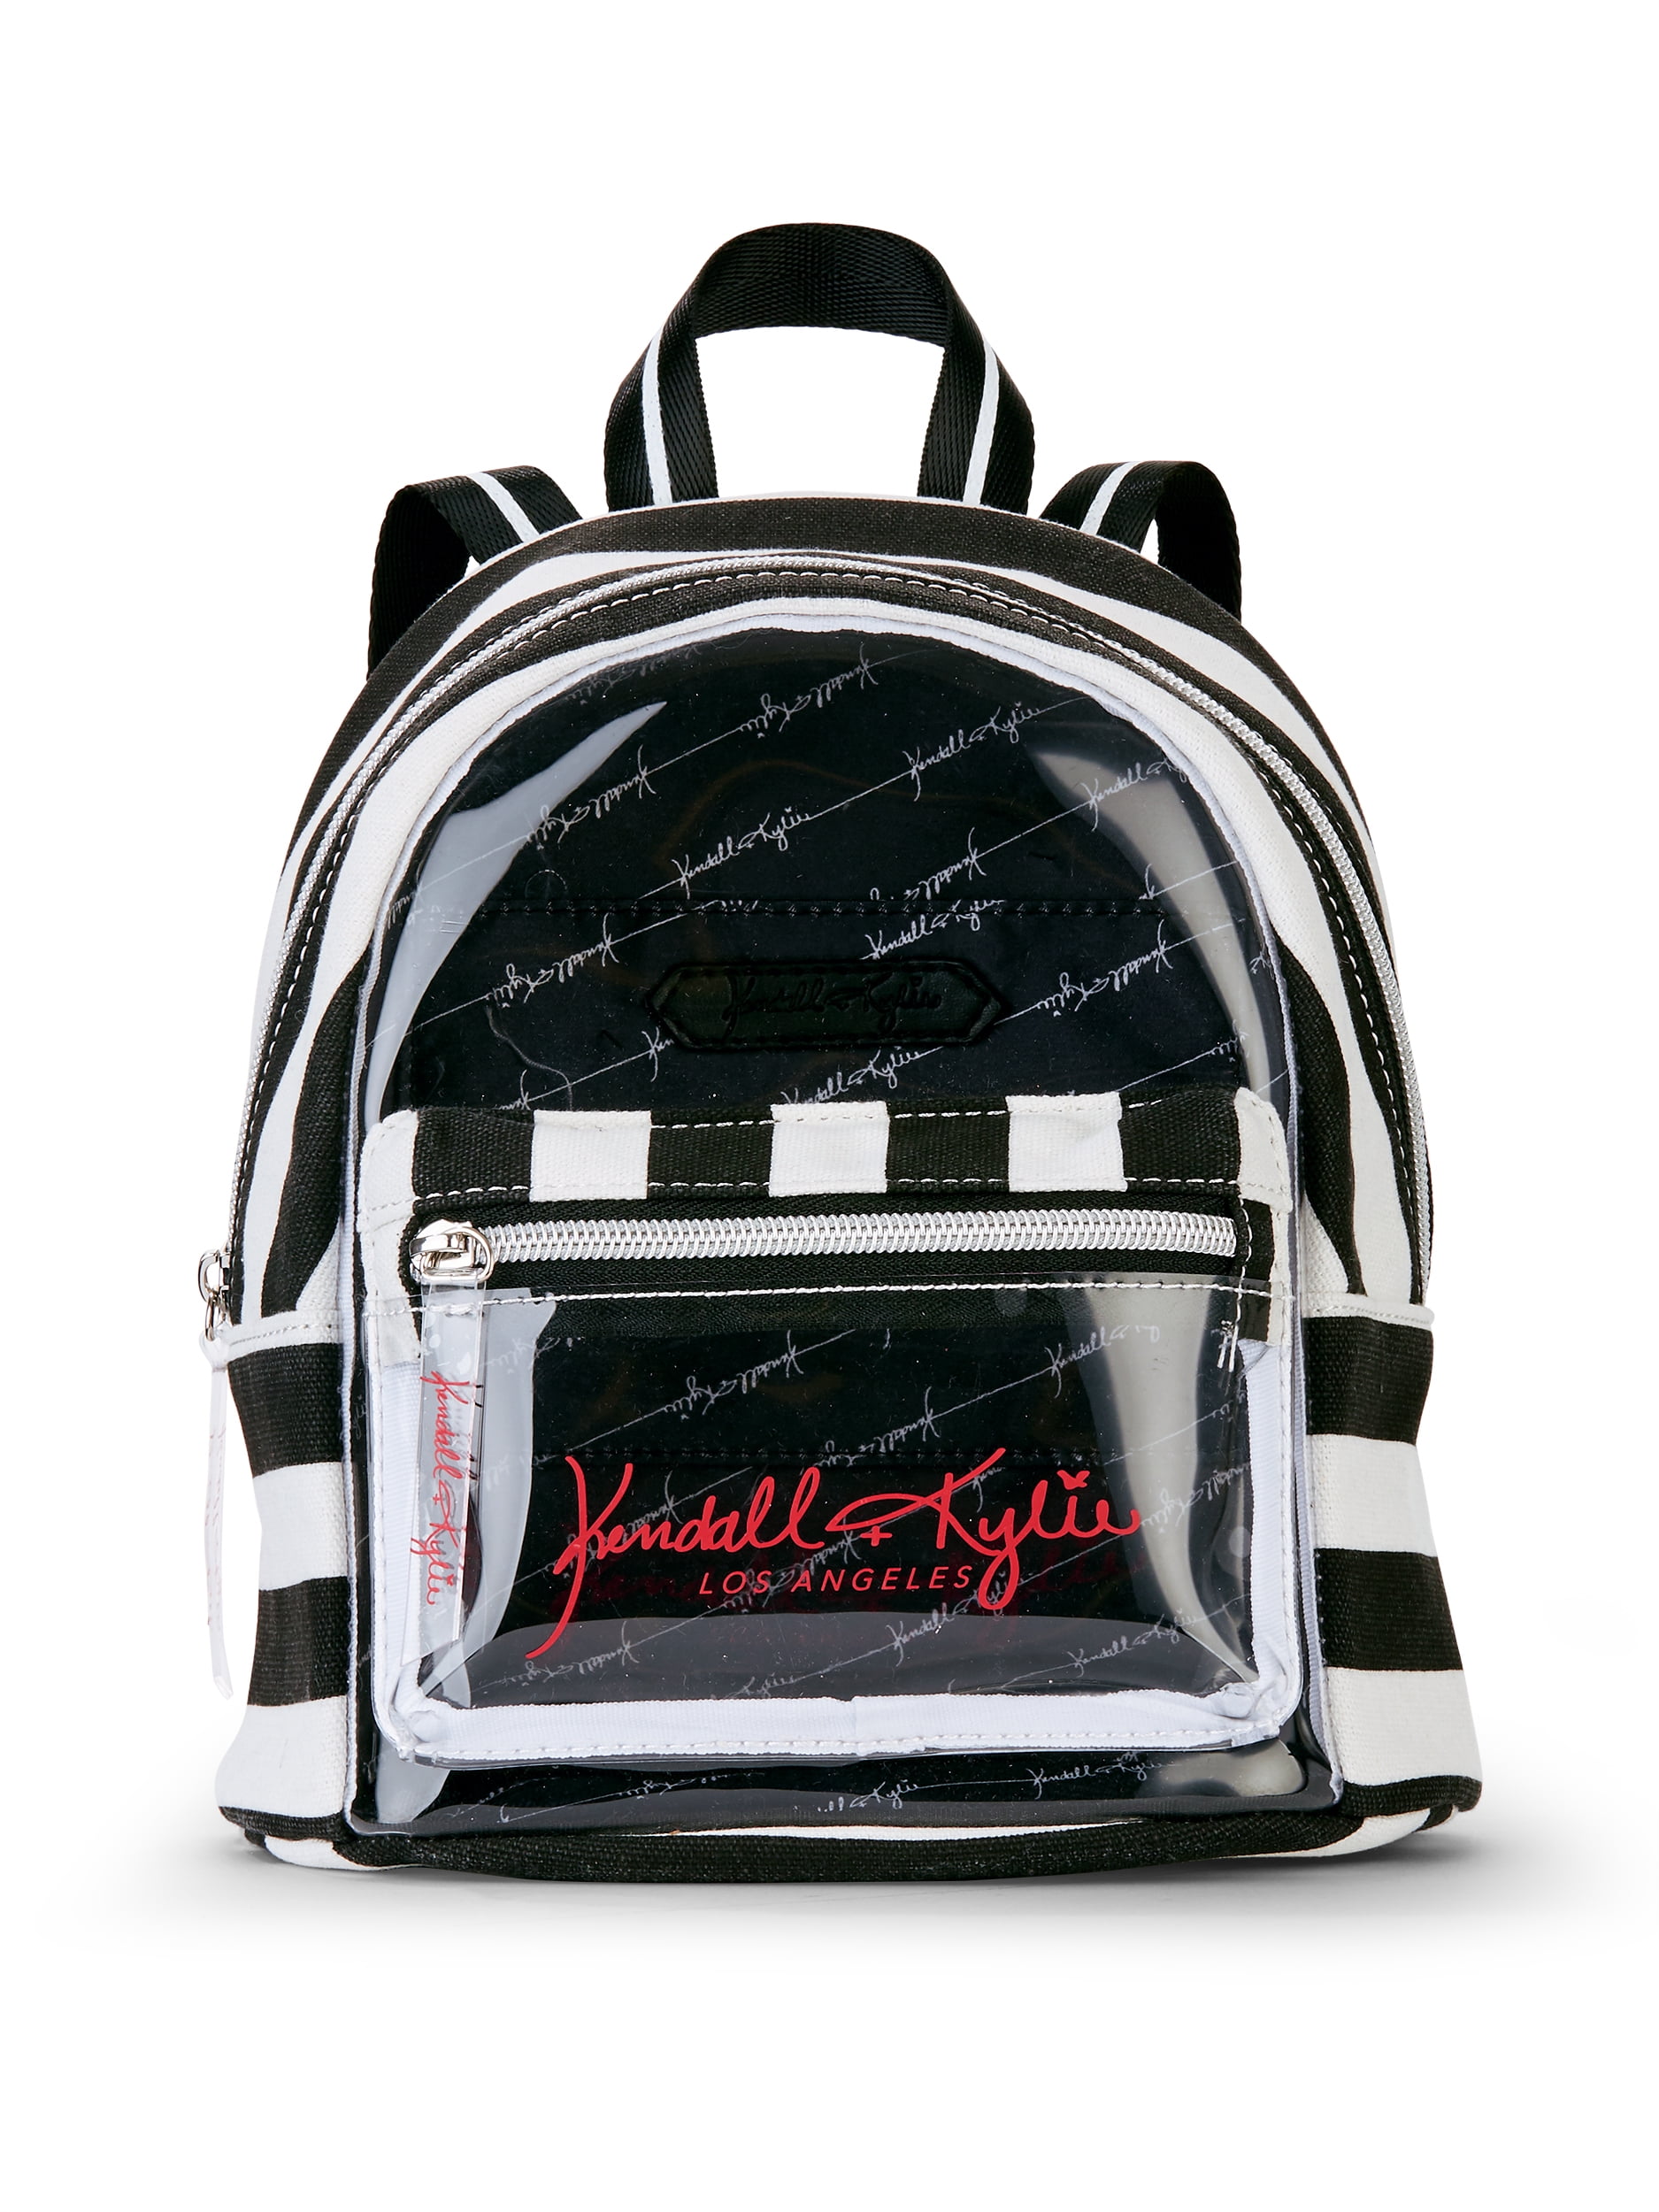 Kendall Kylie for Walmart Clear Lucite Mini Backpack a38d7e01 d3c6 48ad 8078 09e7434954af 2.f0e827392b8a256ea8d6480d6a4357d2